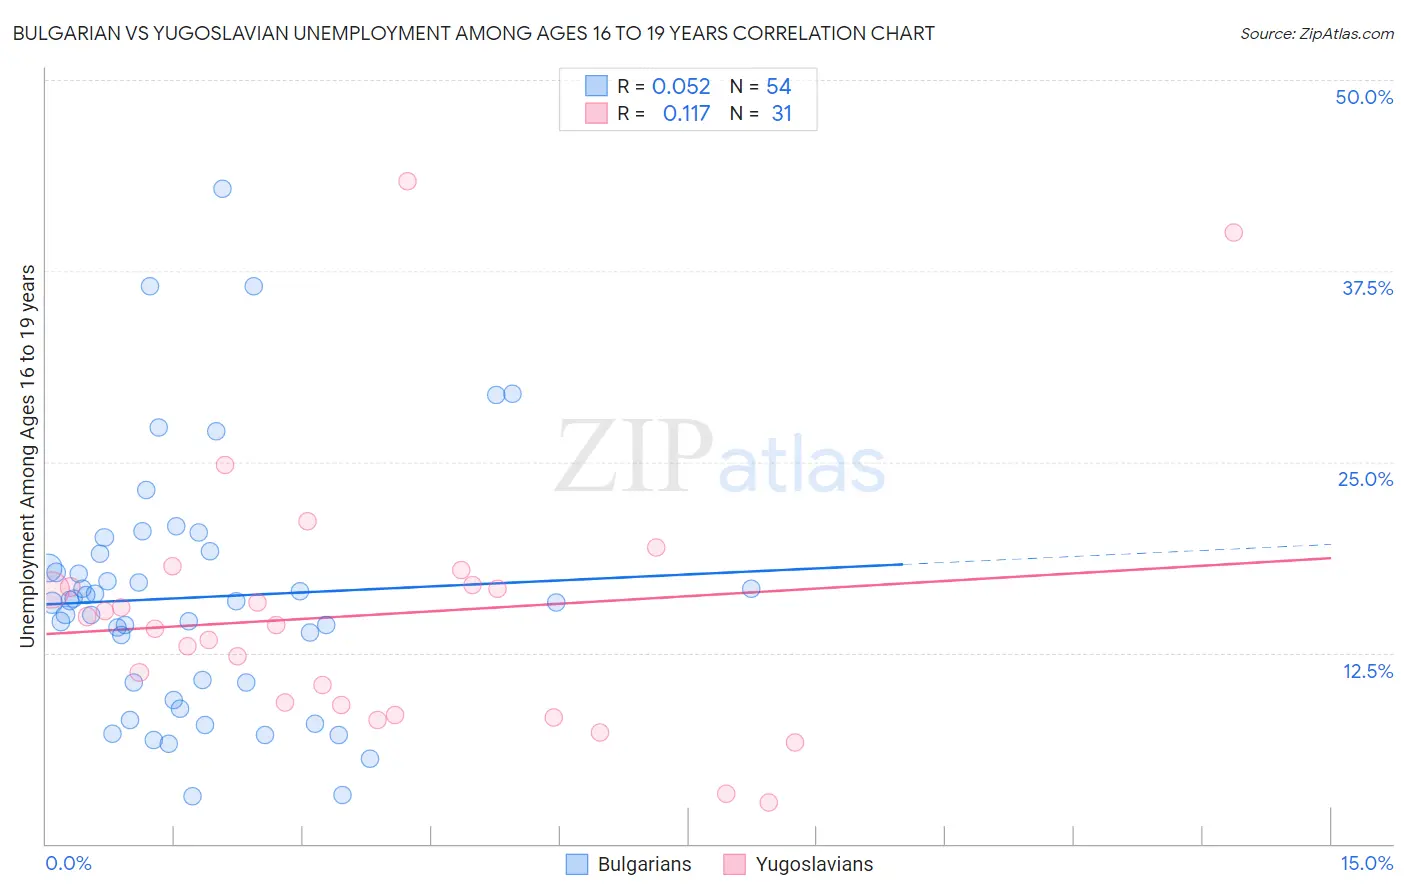 Bulgarian vs Yugoslavian Unemployment Among Ages 16 to 19 years